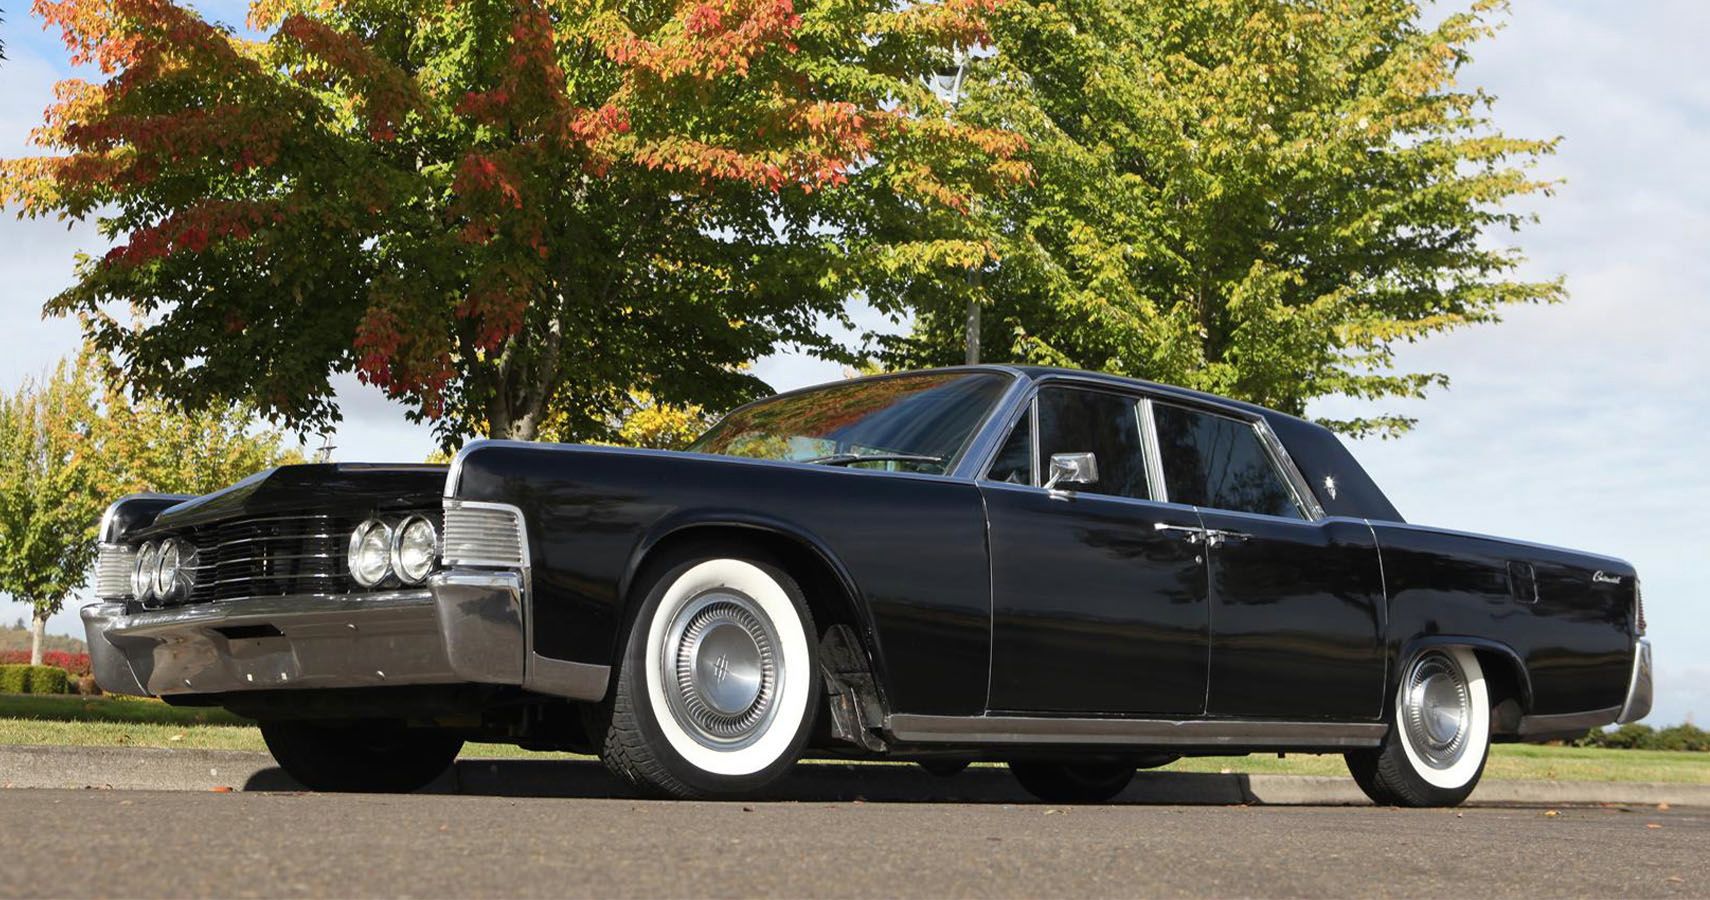 Swapped! 1965 Lincoln Continental With A Supercharged LSA V8